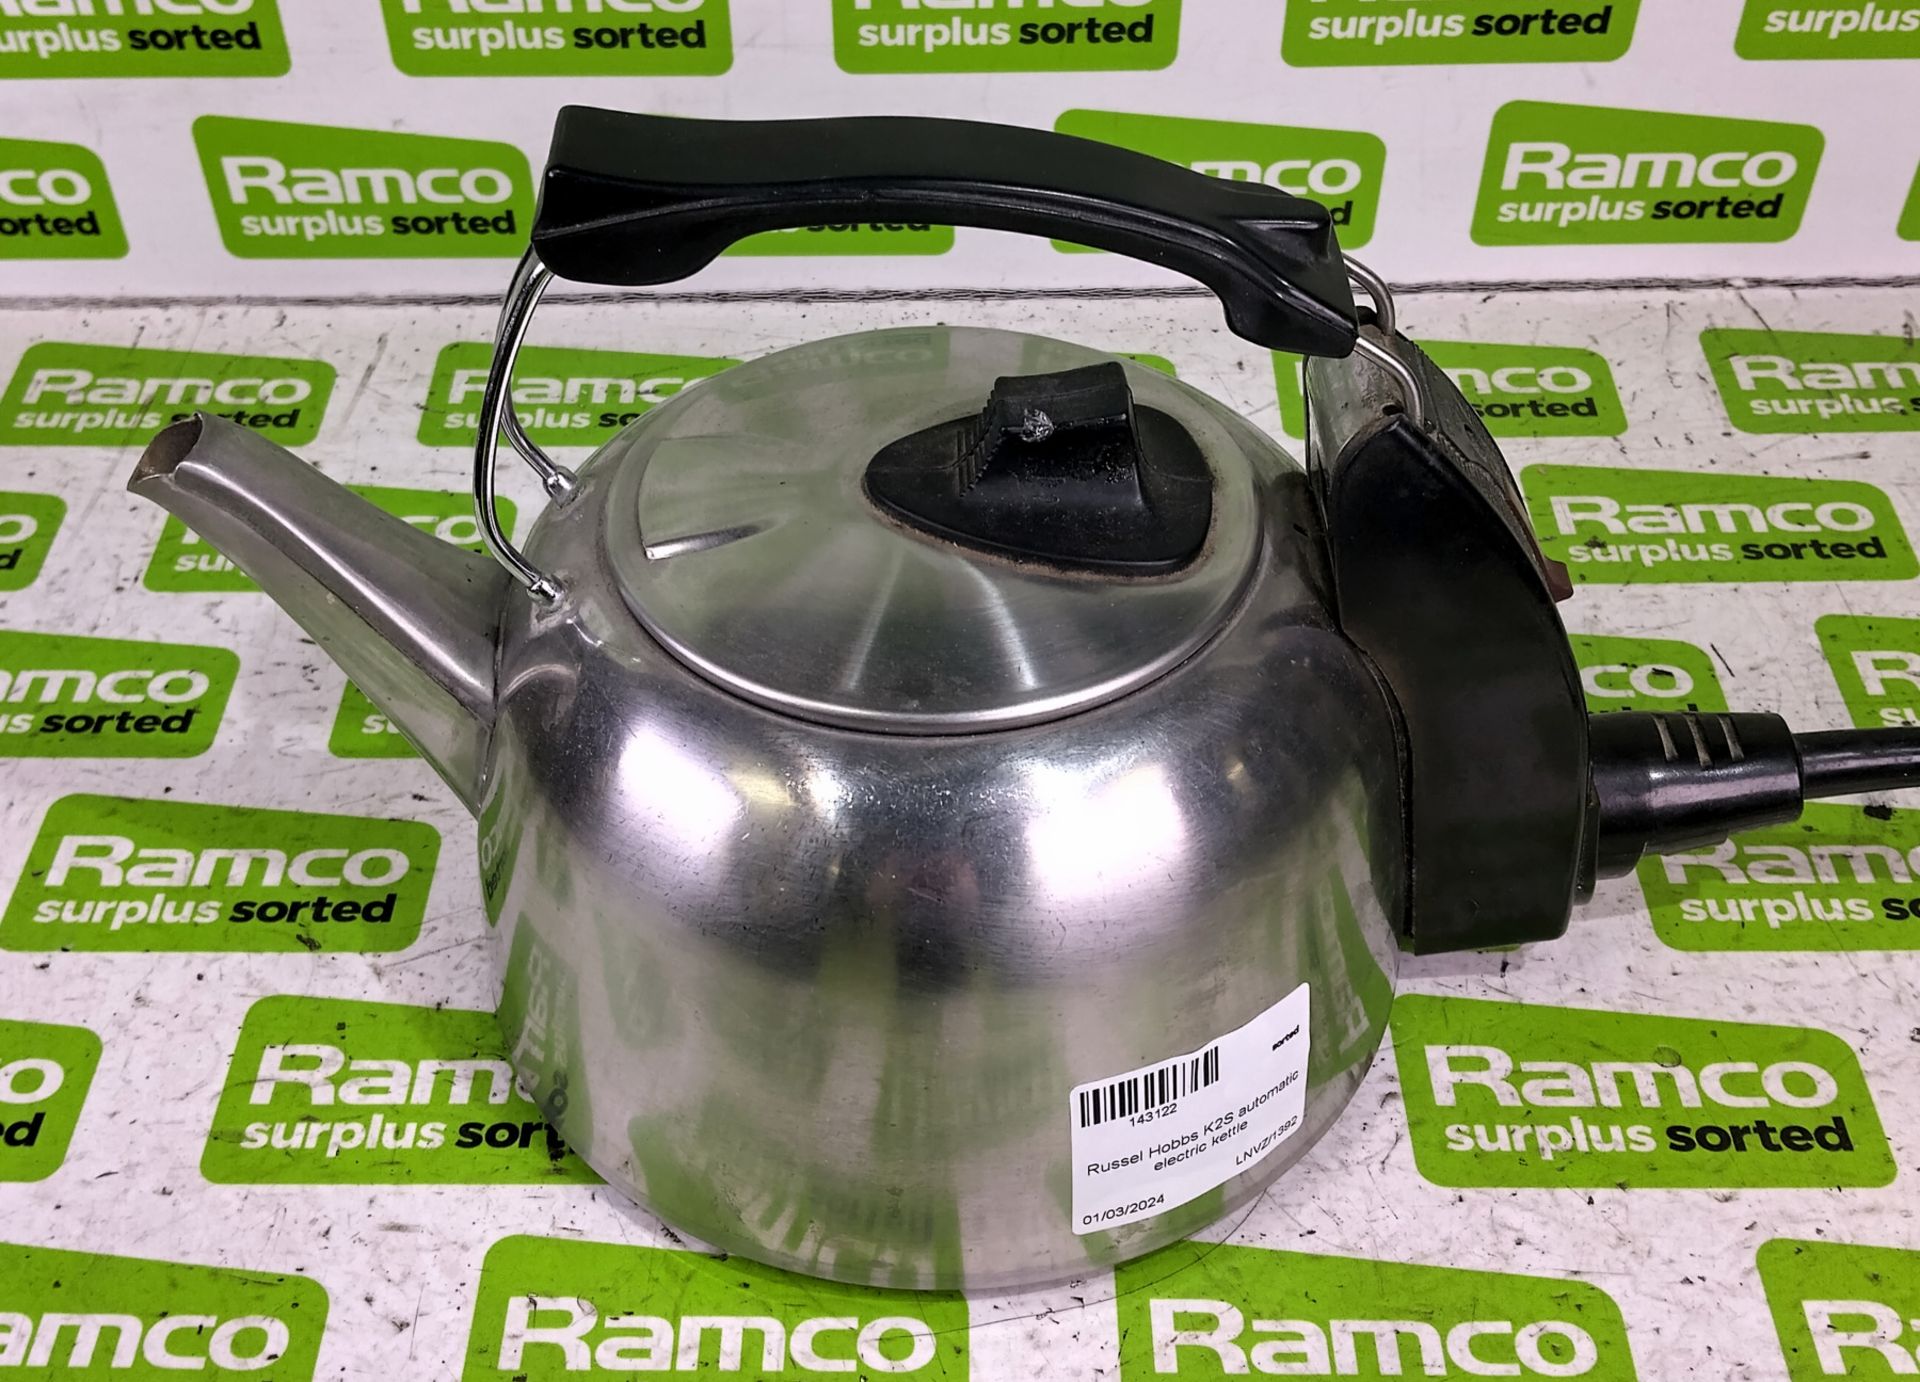 Russell Hobbs K2S automatic electric kettle